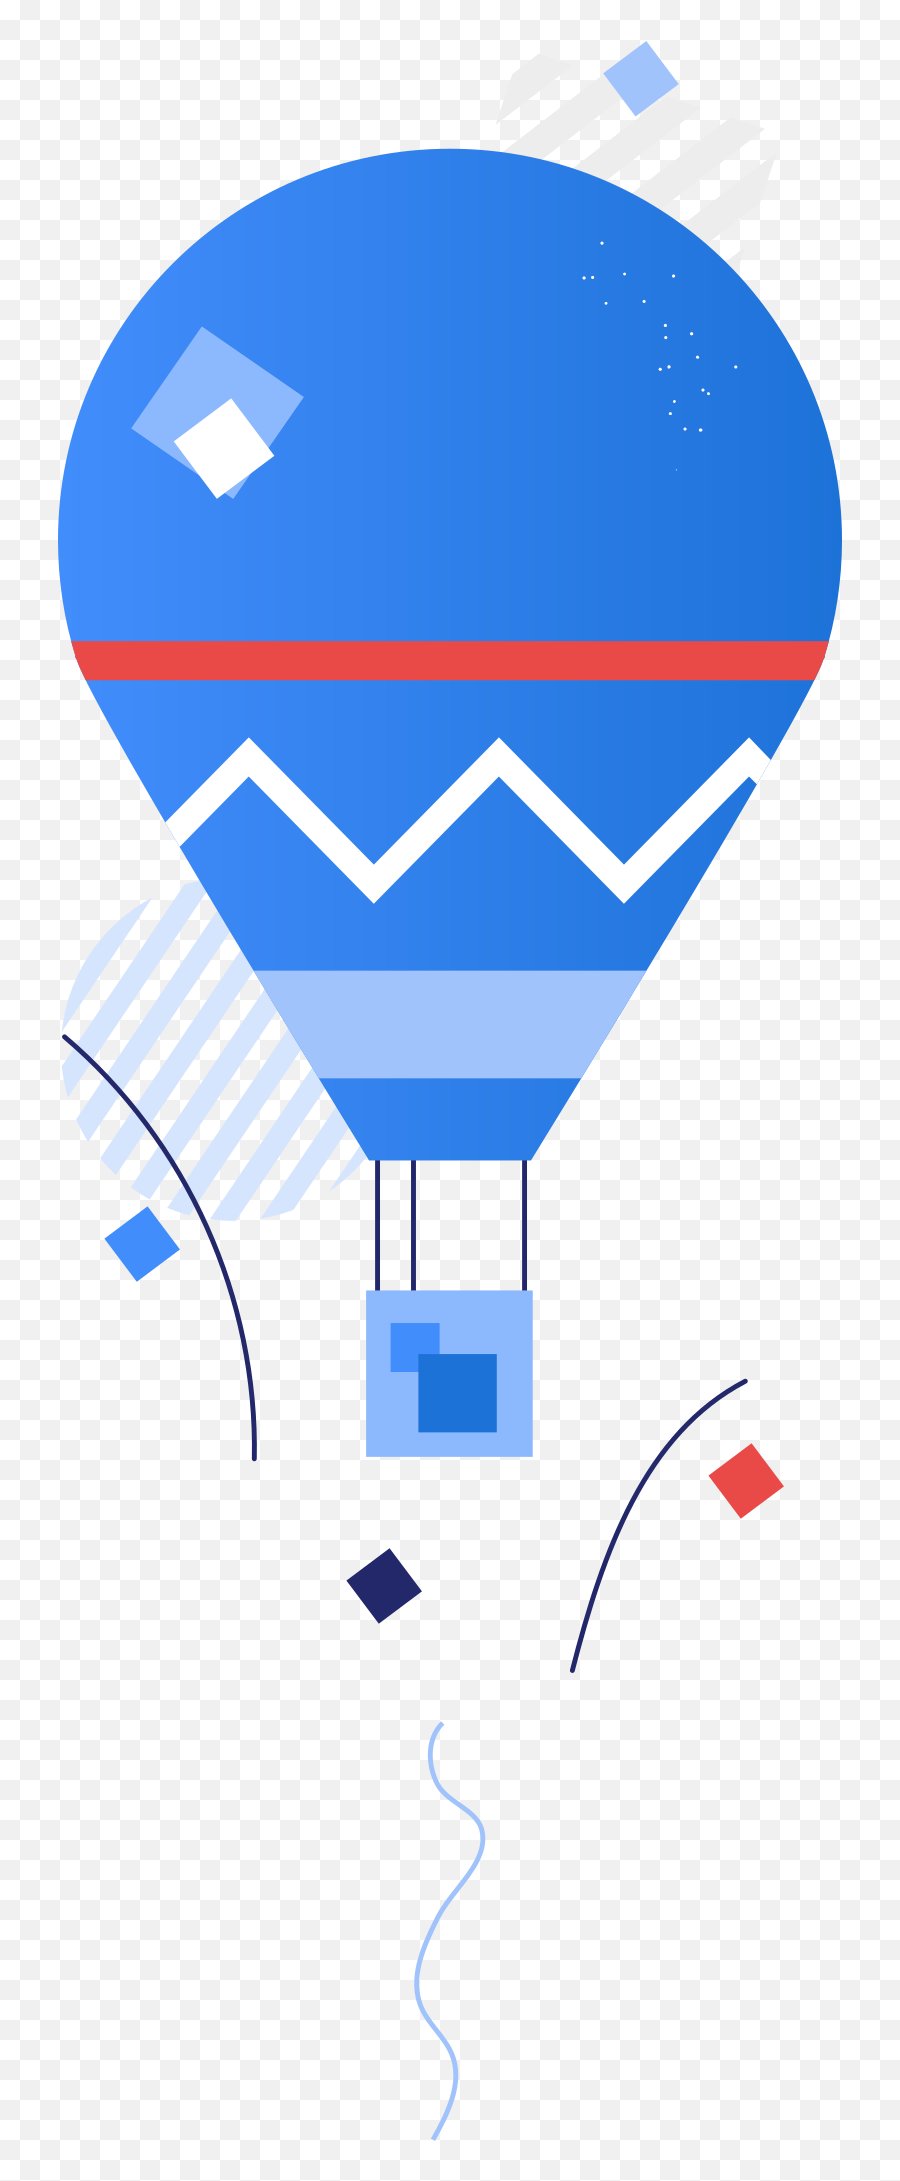 Flying Balloon Clipart Illustrations U0026 Images In Png And Svg Emoji,Hotairballoon Emoticon